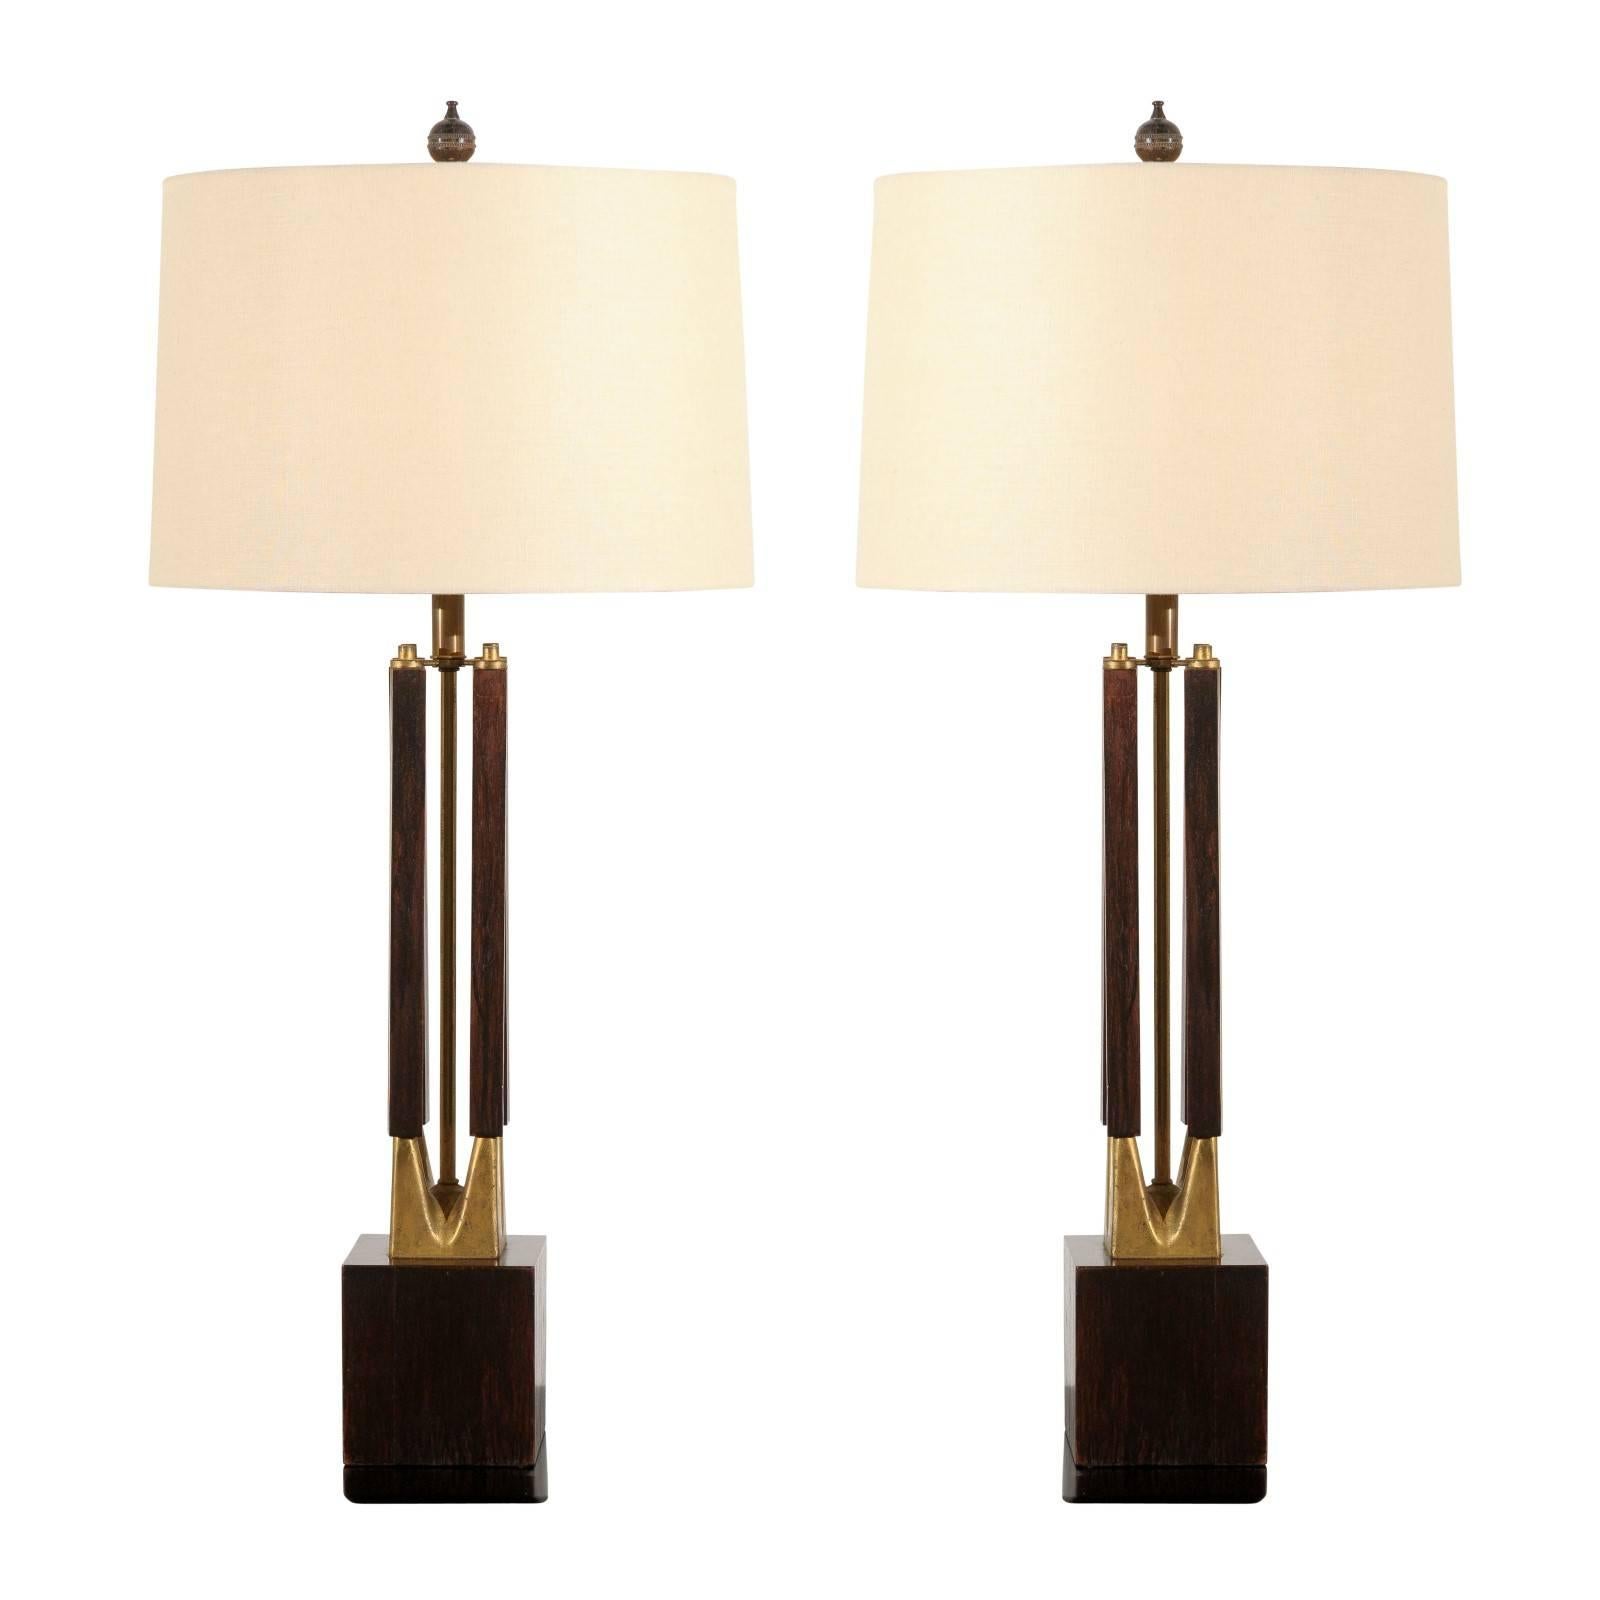 Dramatic Pair of Large-Scale Walnut and Brass Lamps by Laurel, circa 1970